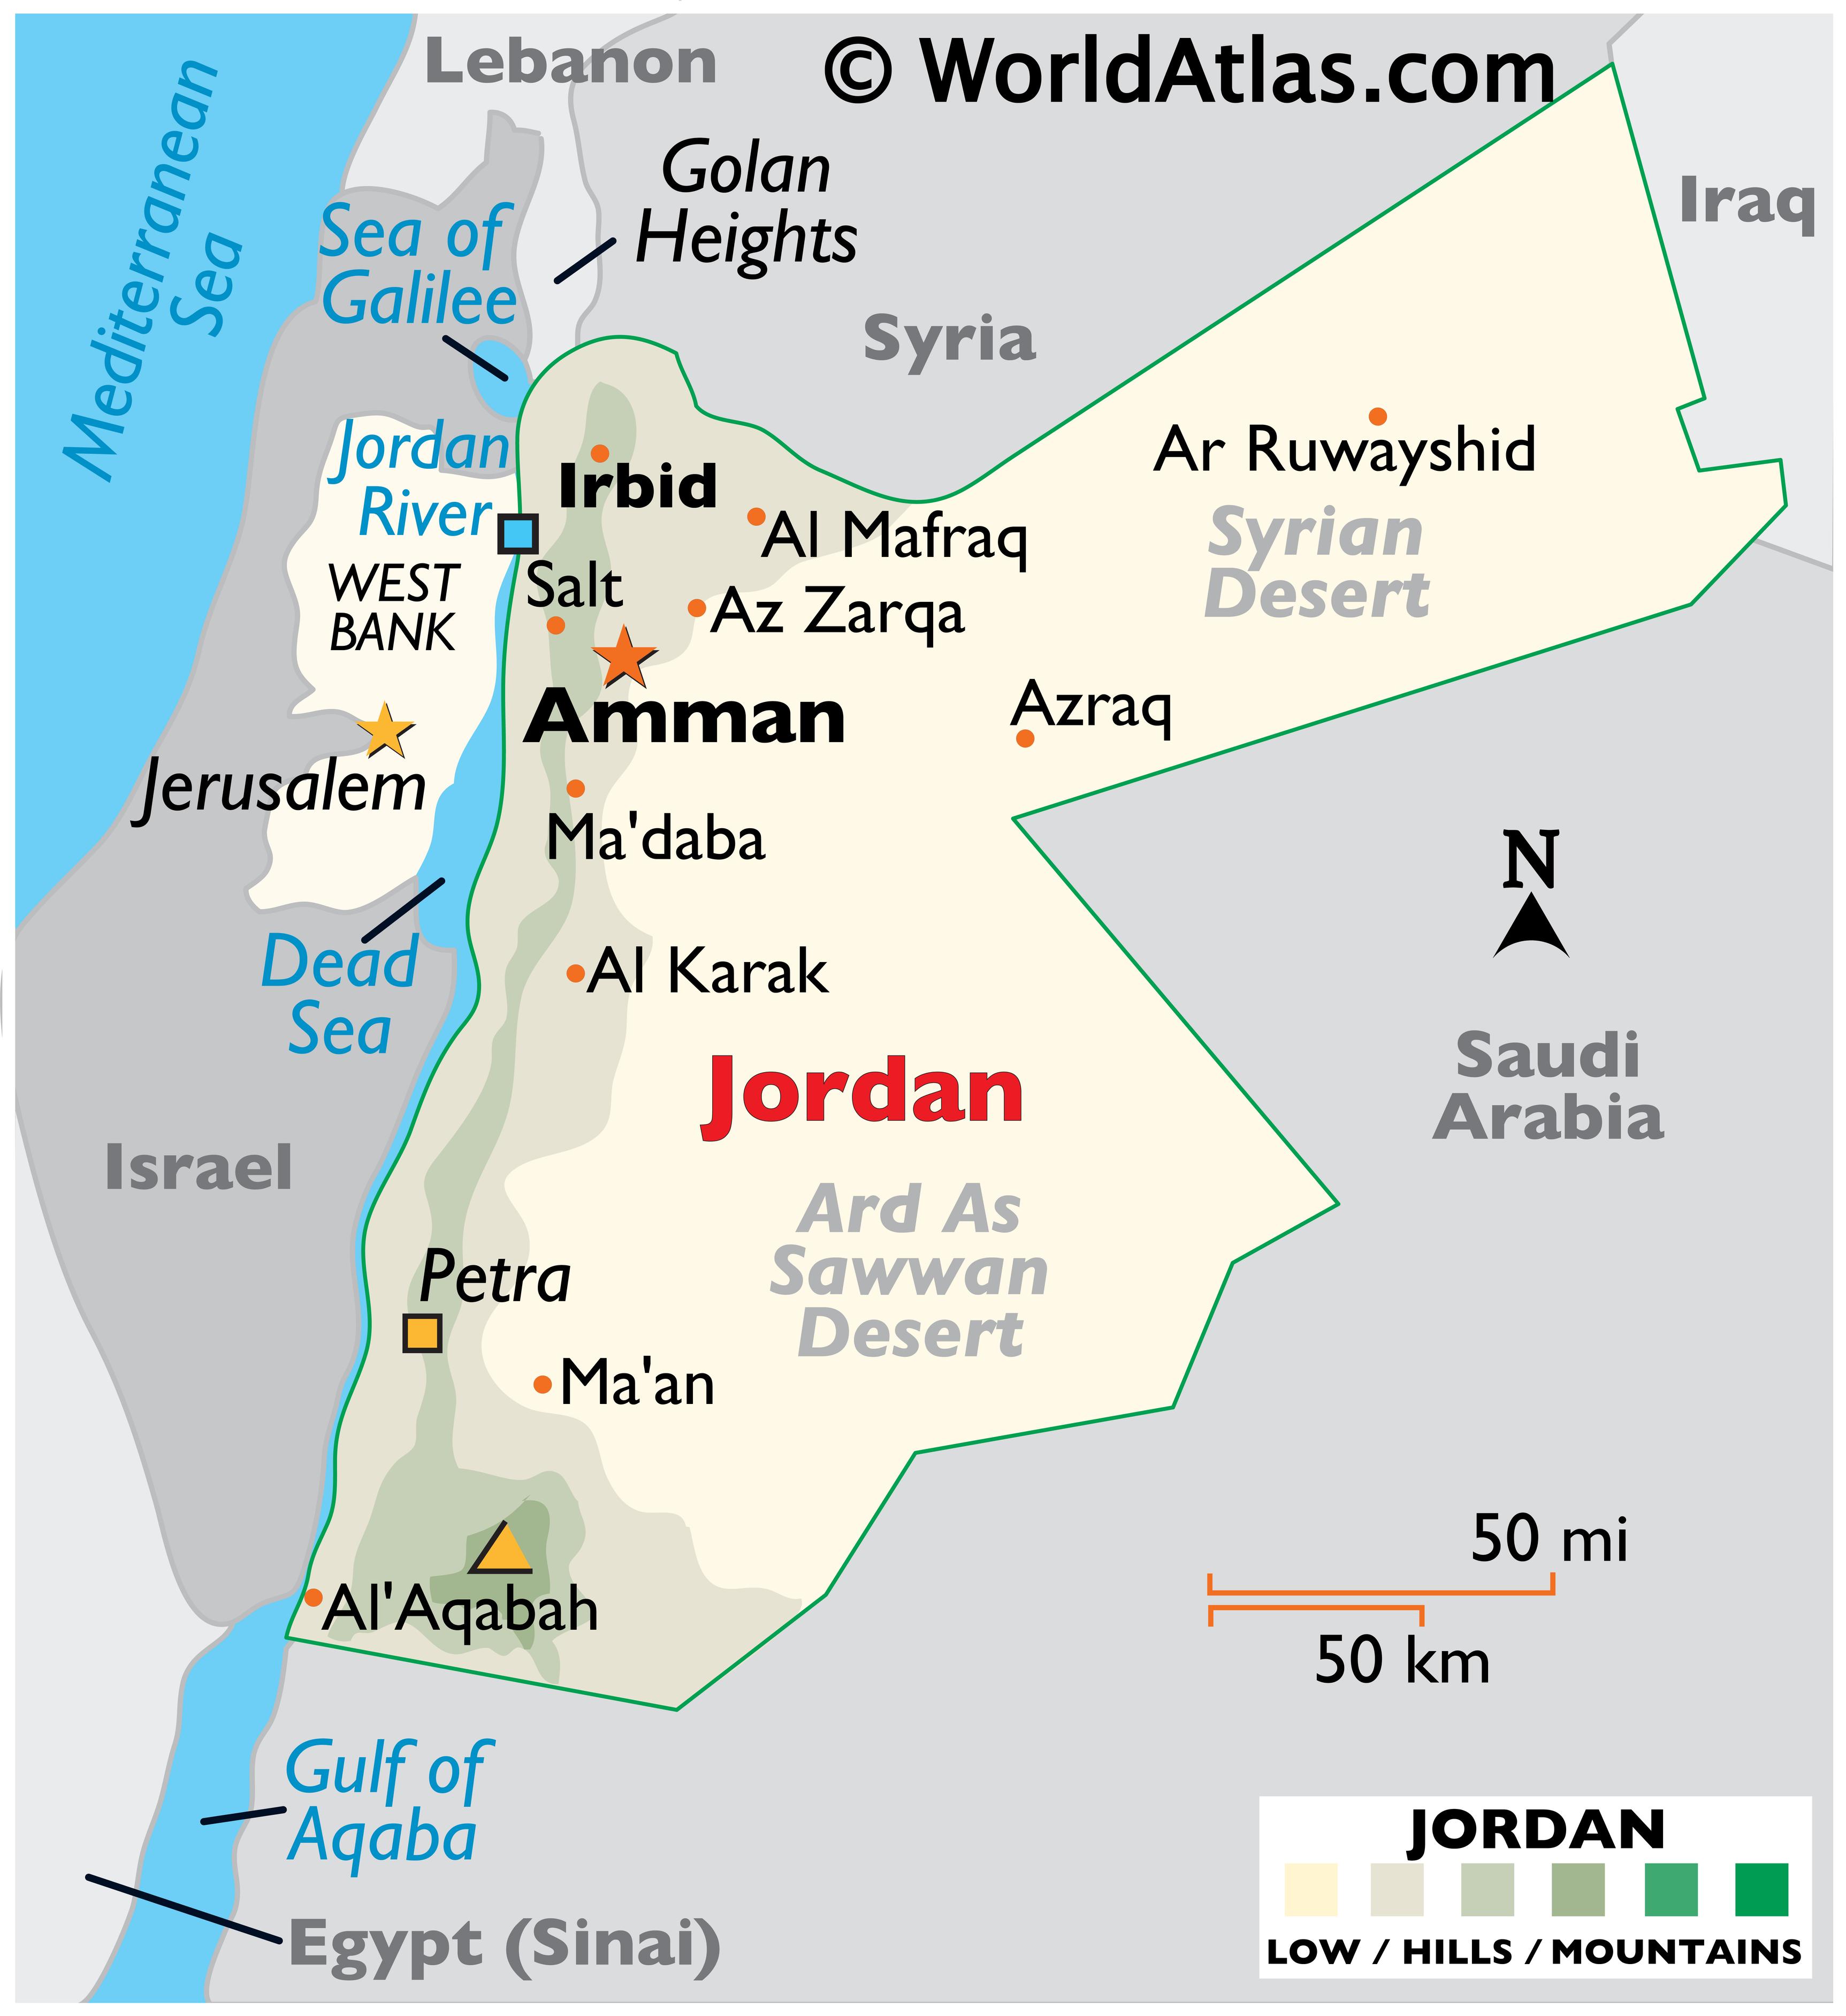 in which continent is jordan